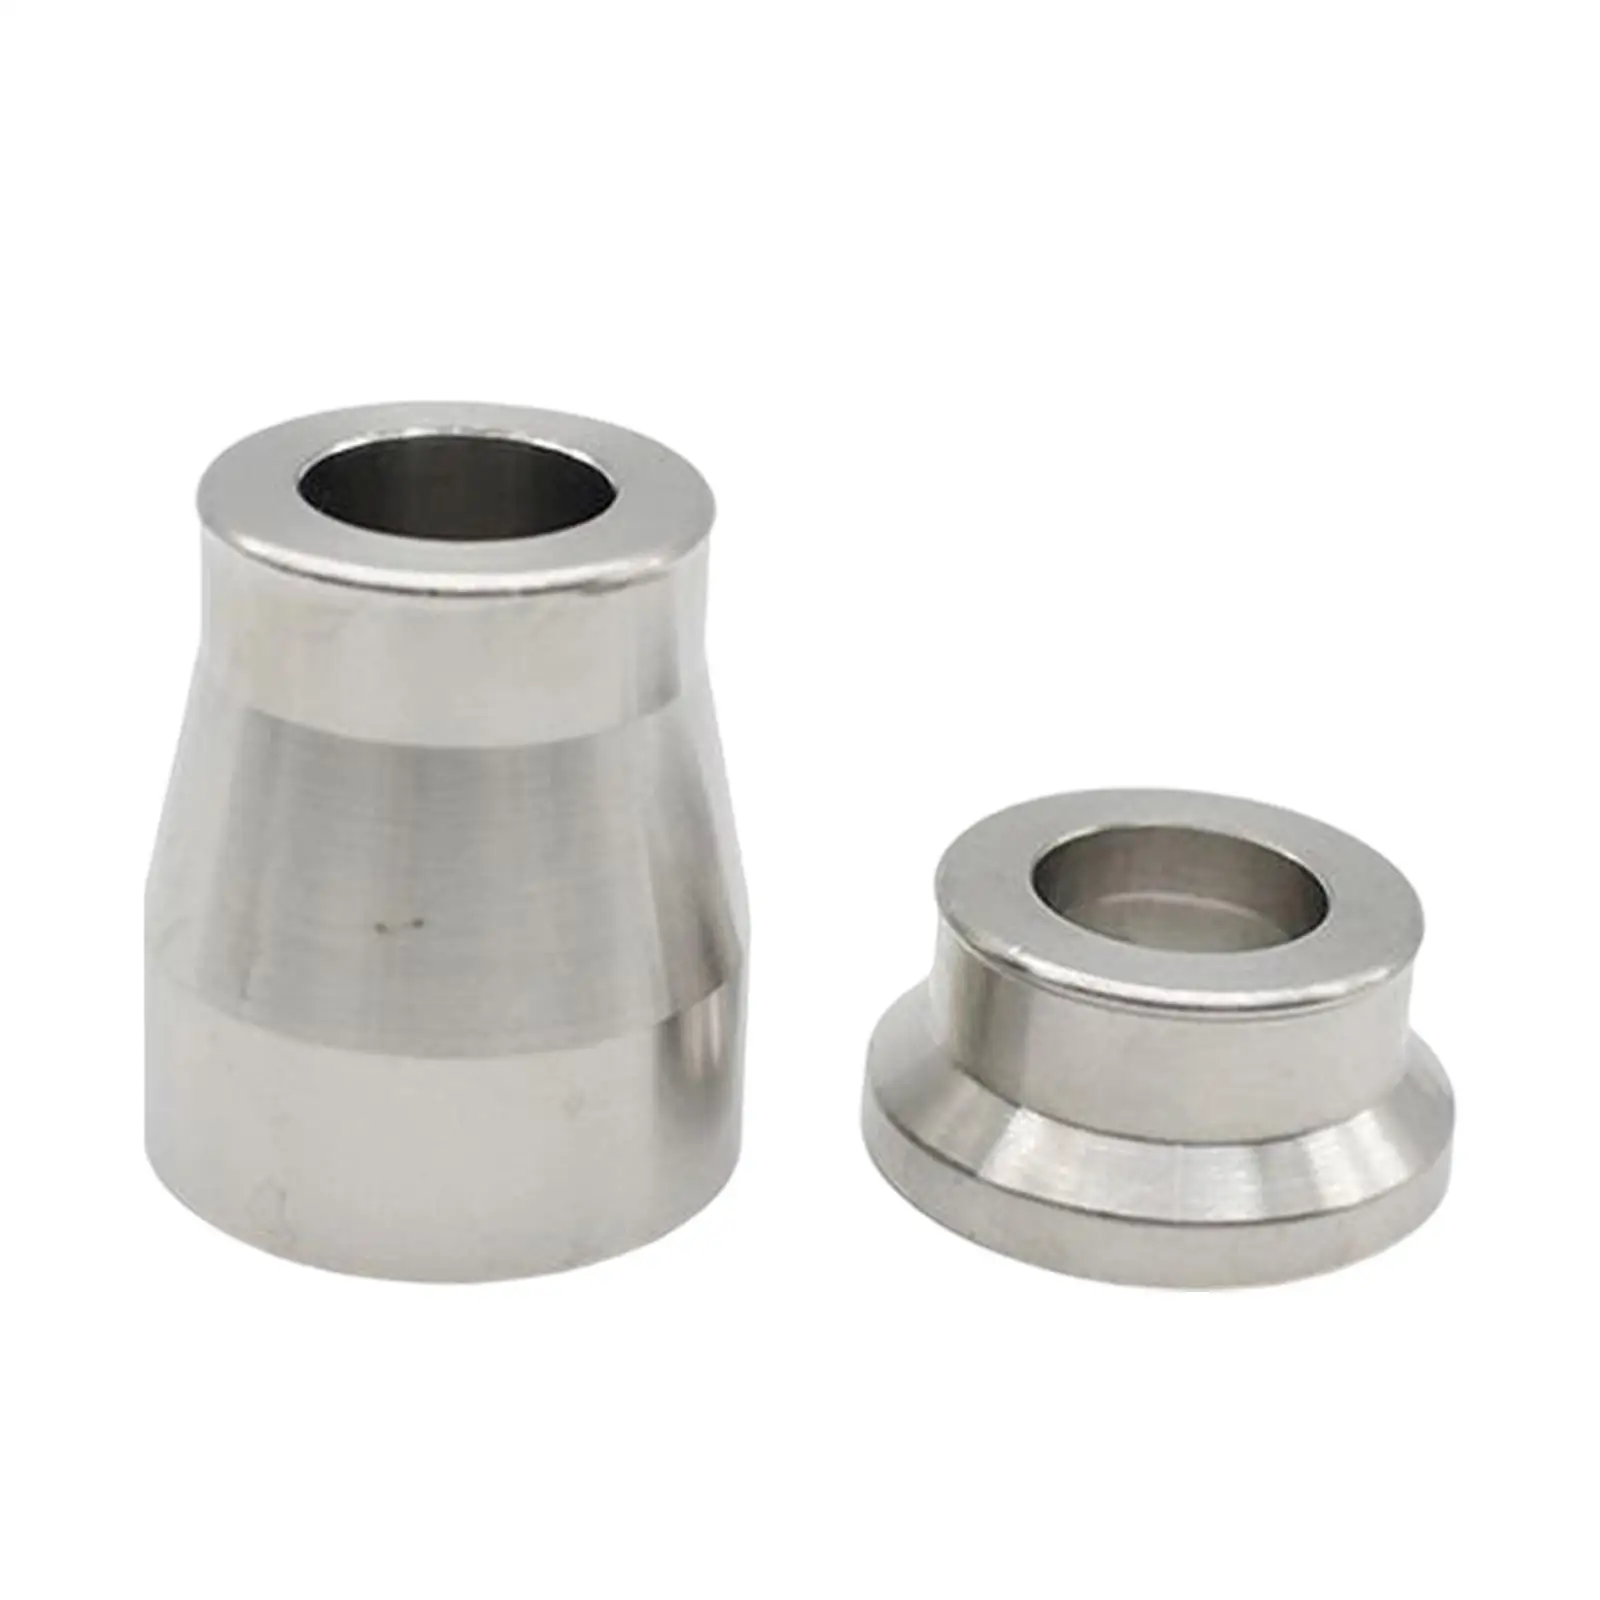 Bearings Hardened Reinforced Bushings Replacement Modified Front Wheel Bushings for Kymco Krv180